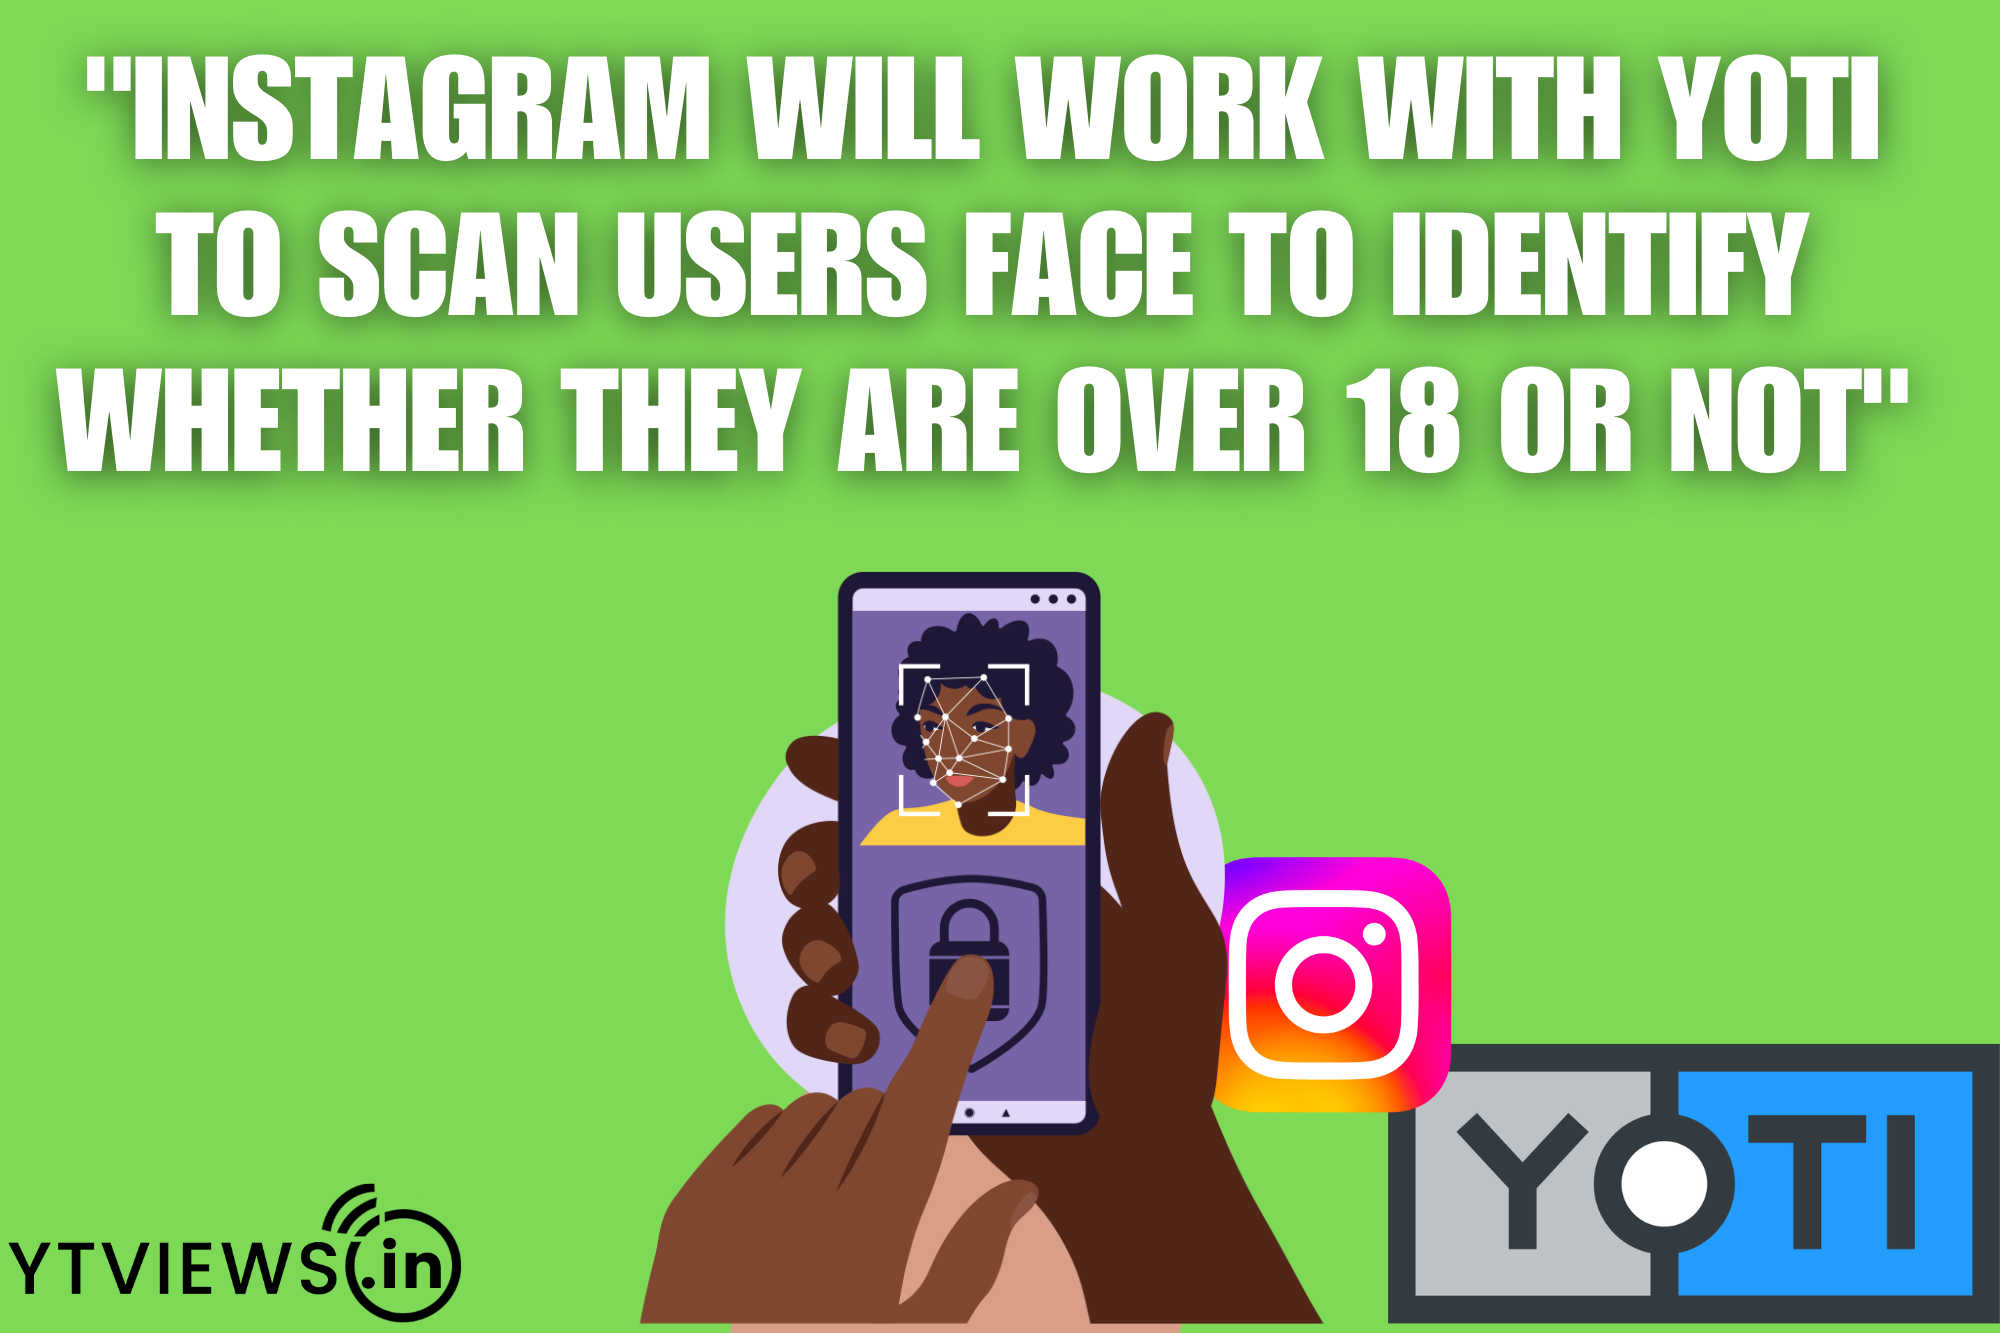 Instagram Will Work With Yoti To Scan Users’ Faces To Identify Whether They Are Over 18 or Not